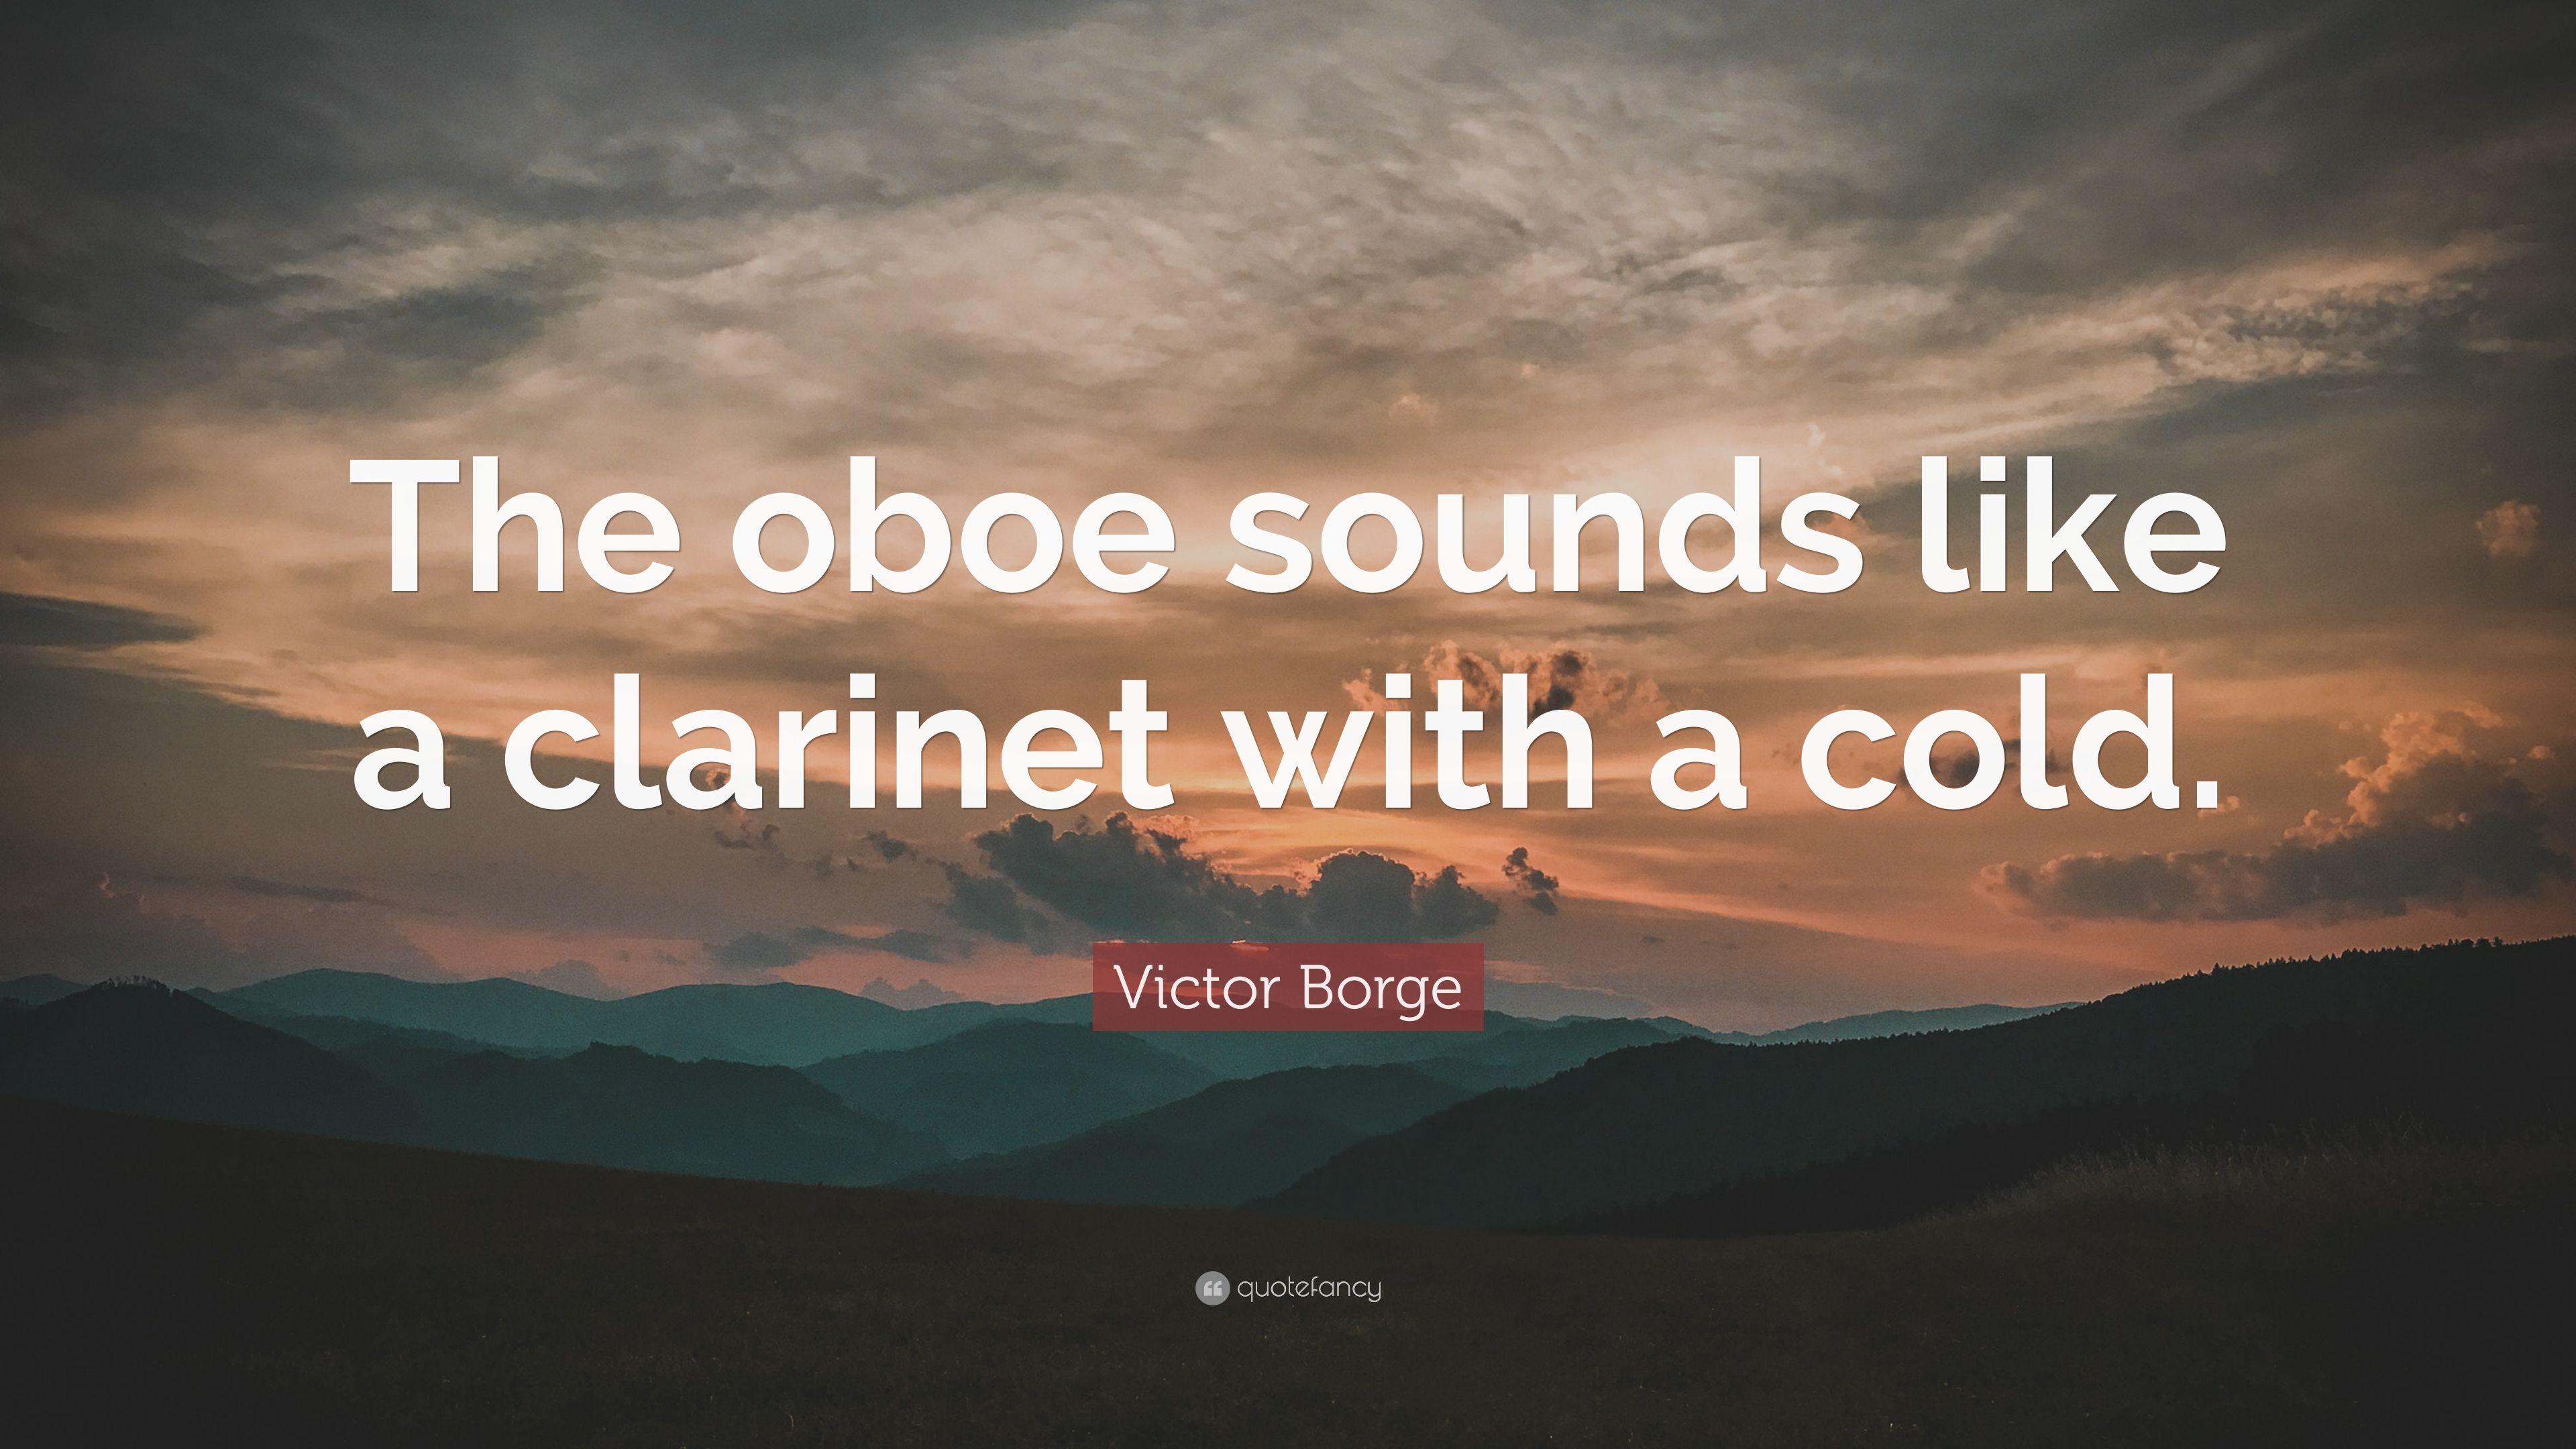 Victor Borge Quote: “The oboe sounds like a clarinet with a cold